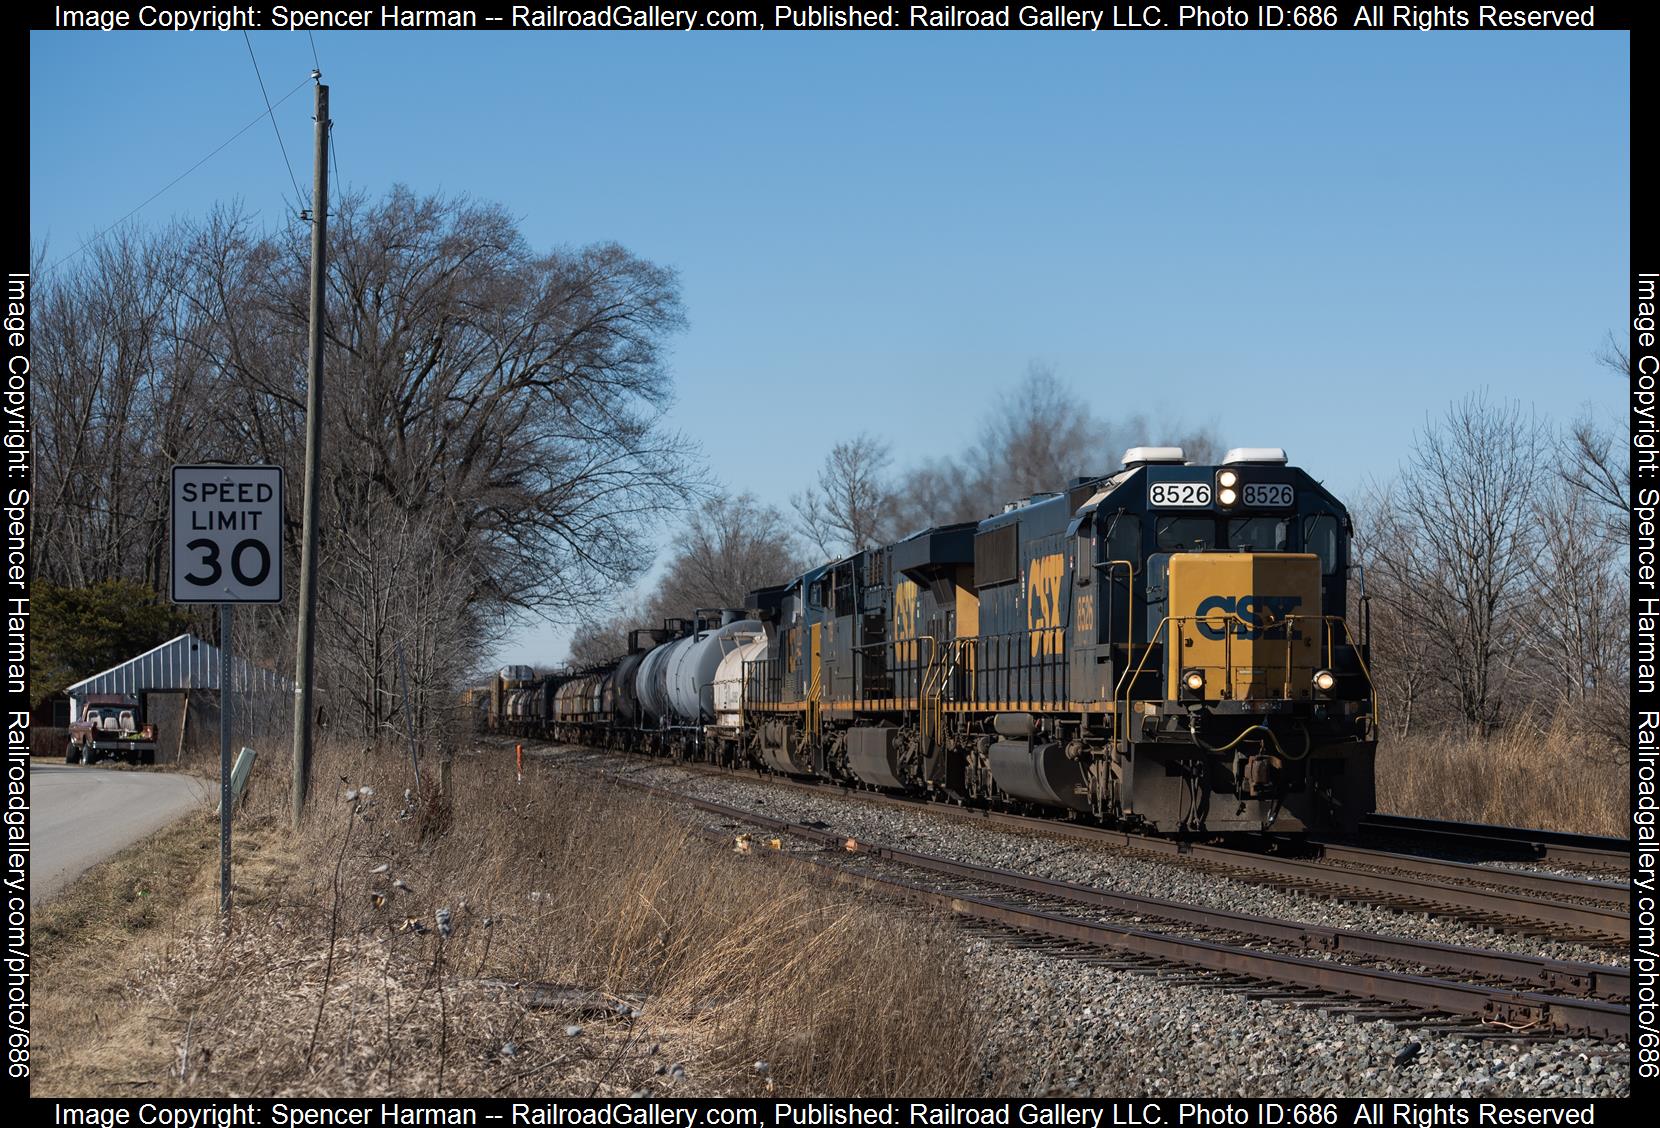 CSXT 8526 is a class EMD SD50 and  is pictured in Kimmel, Indiana, USA.  This was taken along the Garrett Subdivision on the CSX Transportation. Photo Copyright: Spencer Harman uploaded to Railroad Gallery on 02/11/2023. This photograph of CSXT 8526 was taken on Saturday, February 11, 2023. All Rights Reserved. 